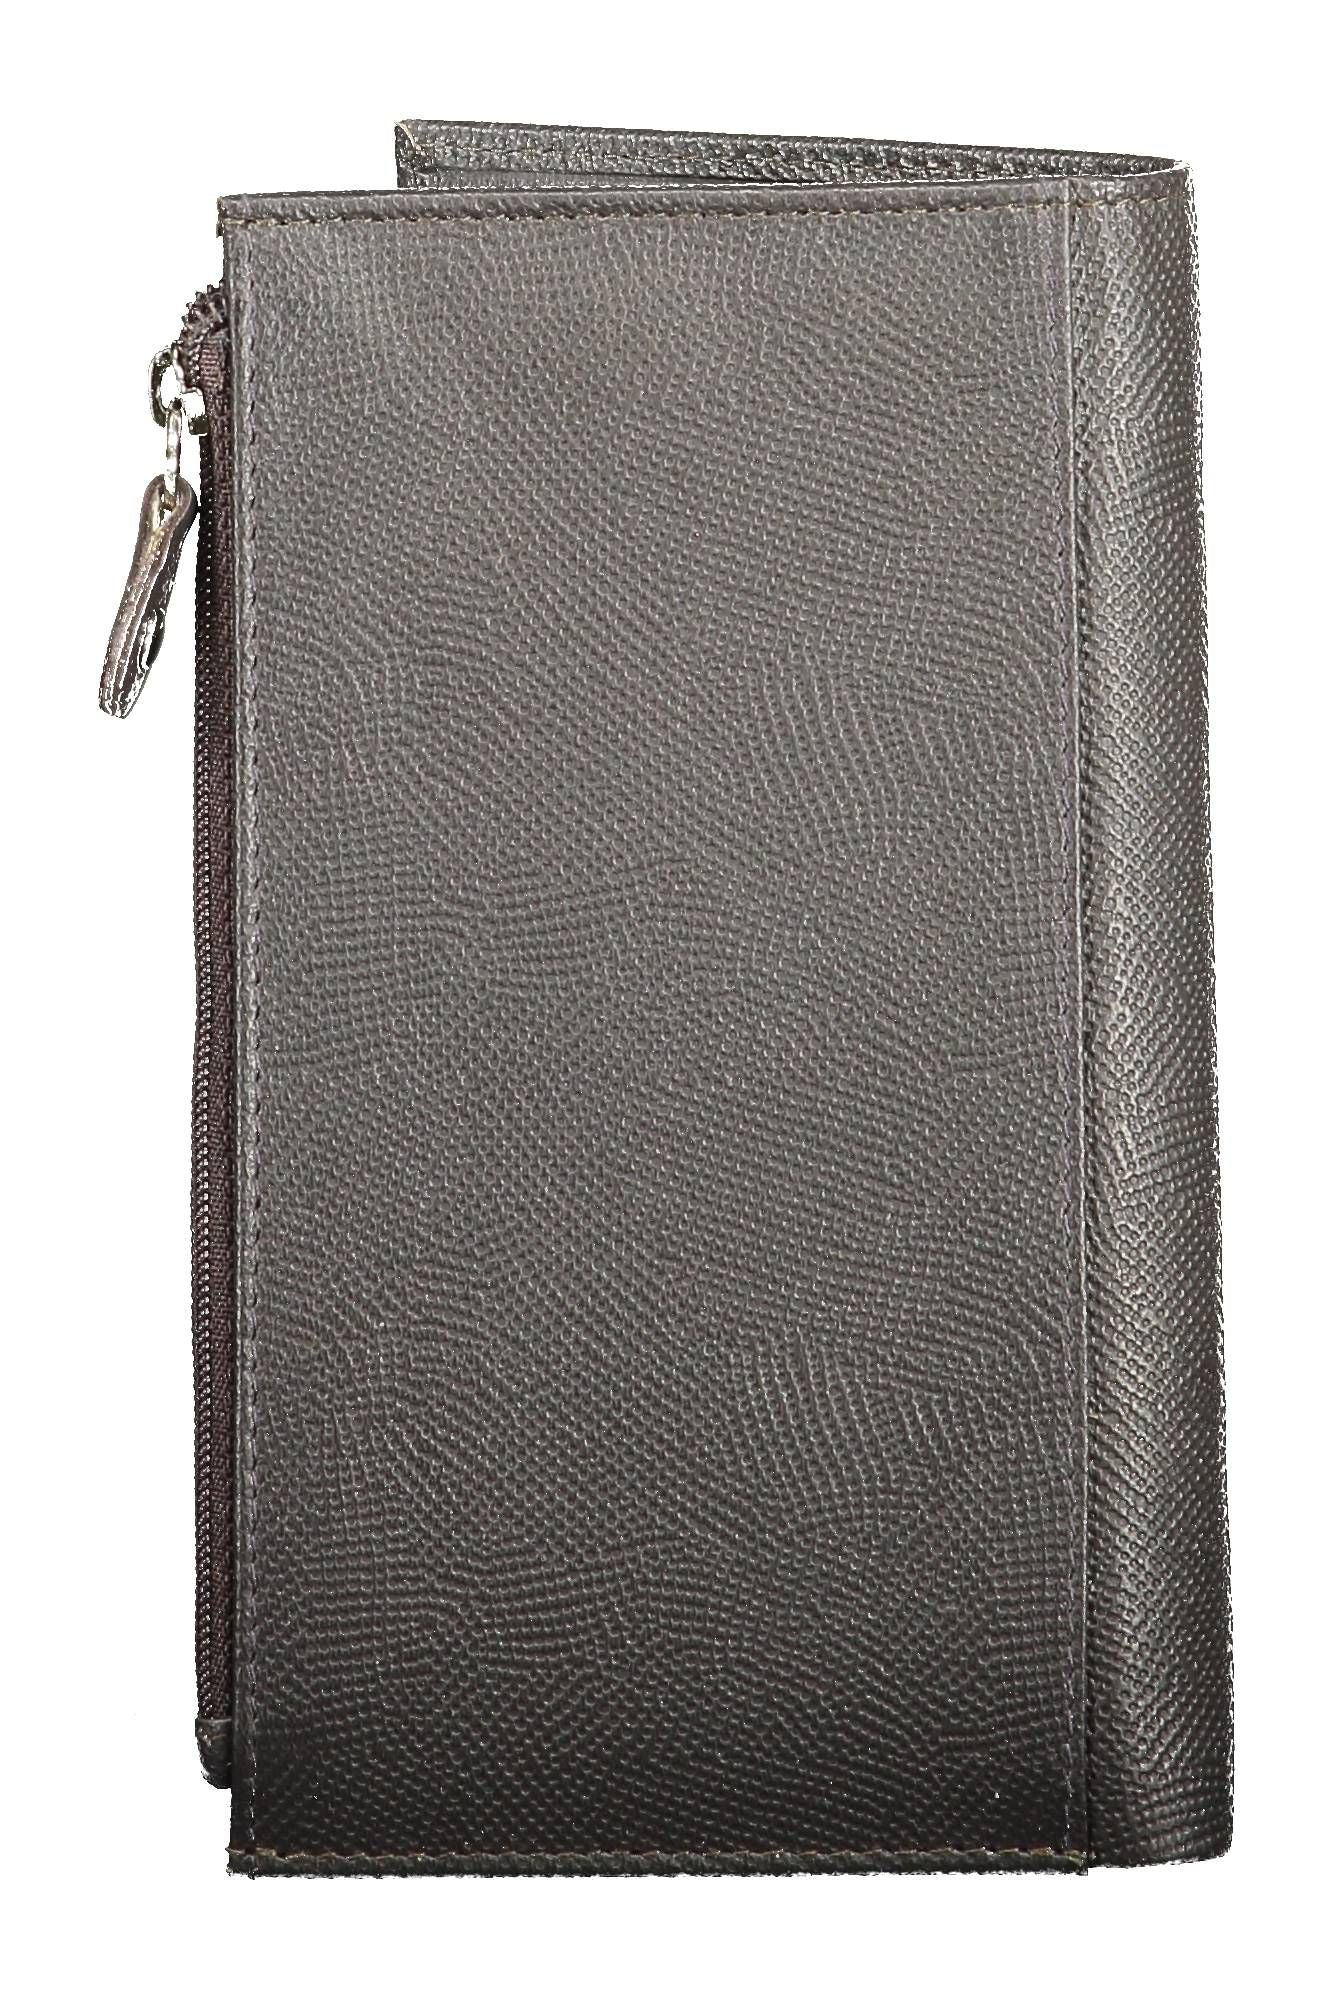 Sergio Tacchini Elegant Leather Bifold Wallet with Coin Pocket